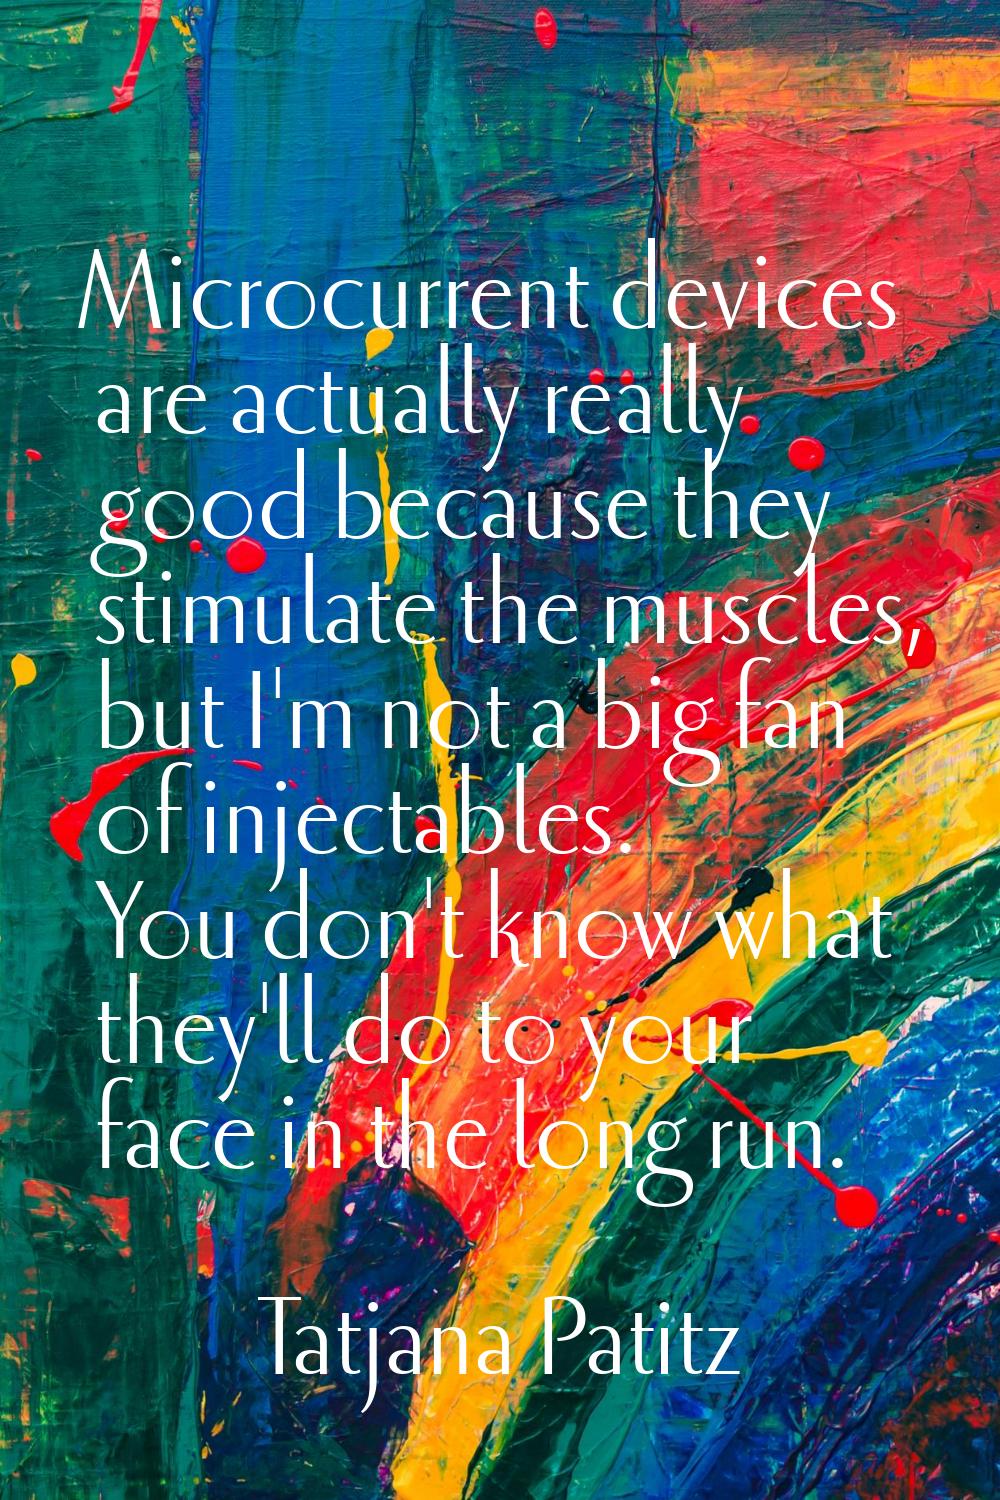 Microcurrent devices are actually really good because they stimulate the muscles, but I'm not a big